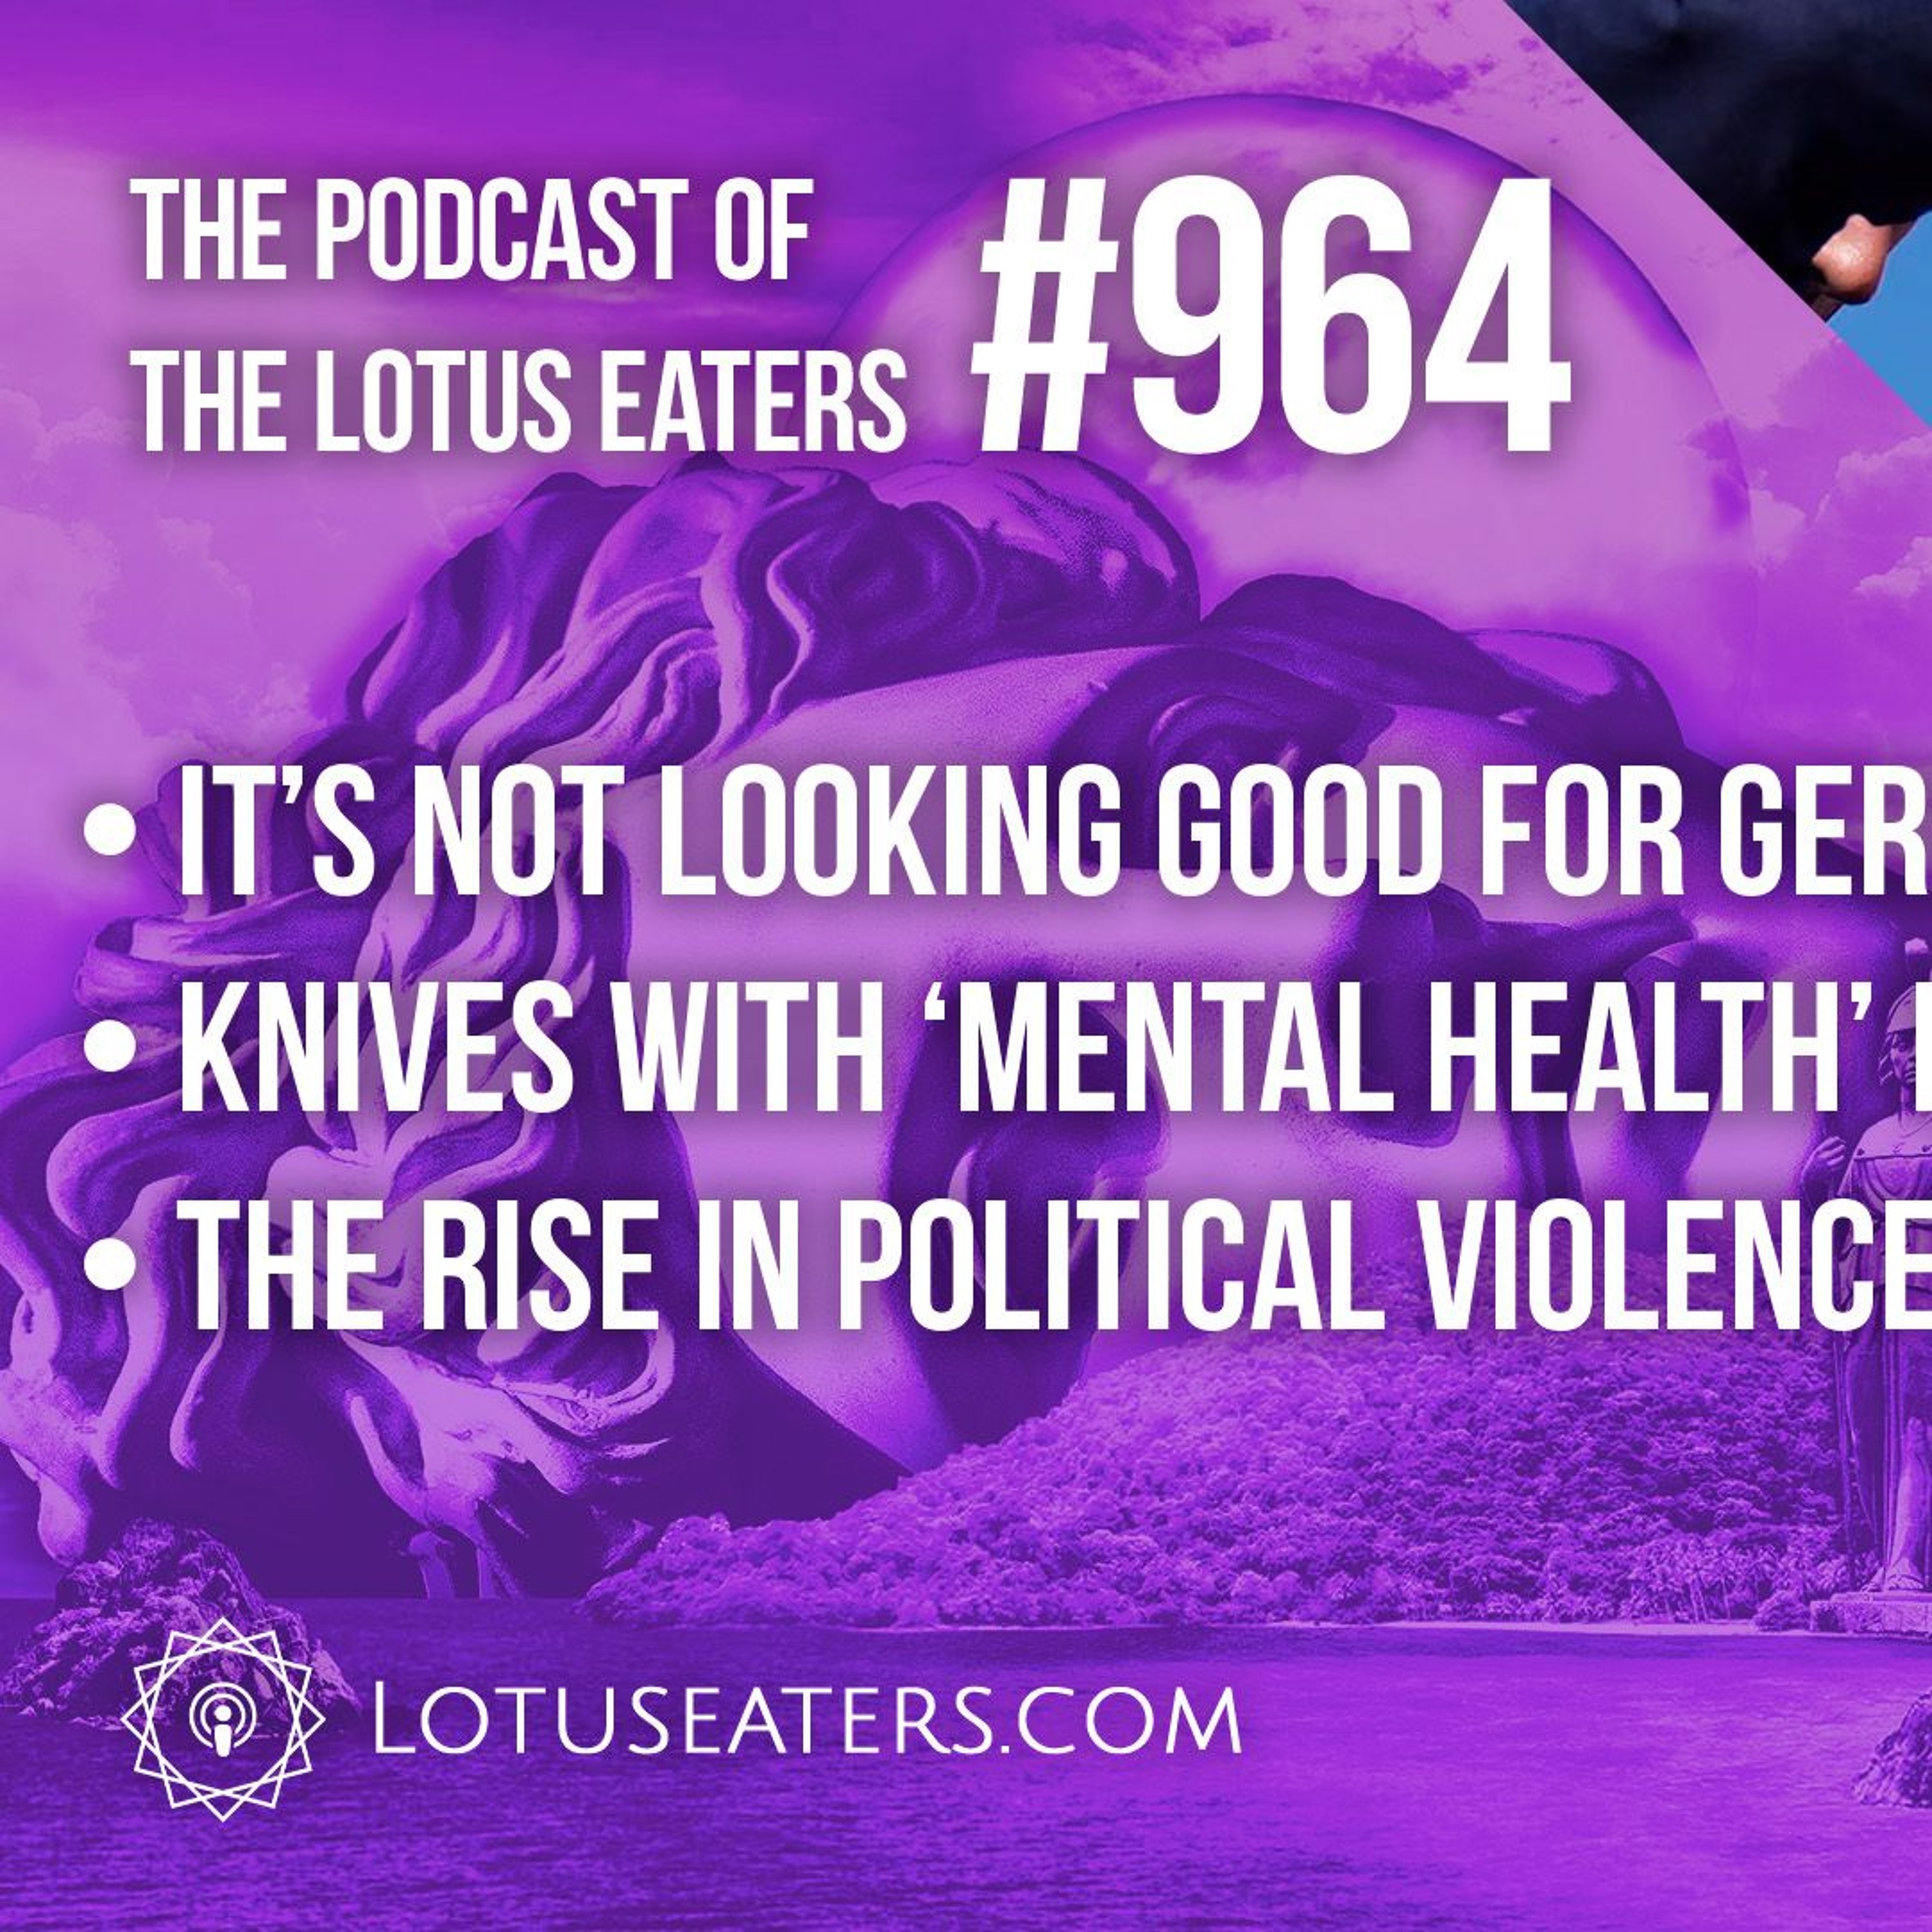 The Podcast of the Lotus Eaters #964